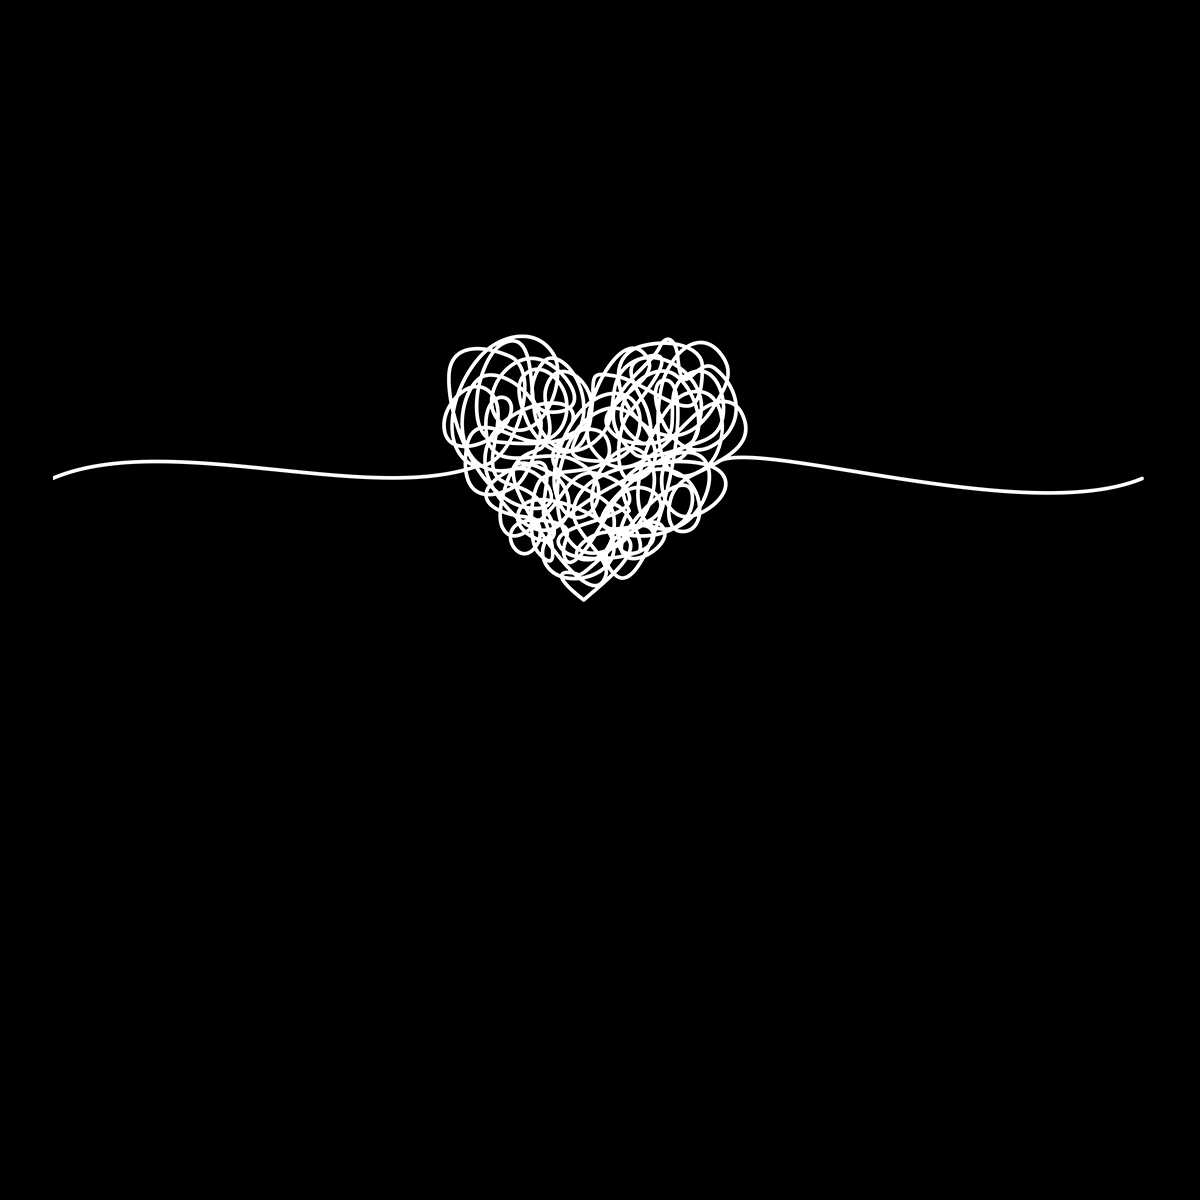 Tangled way to the heart - hand drawn scribble Valentines T-shirt edition - Kuzi Tees